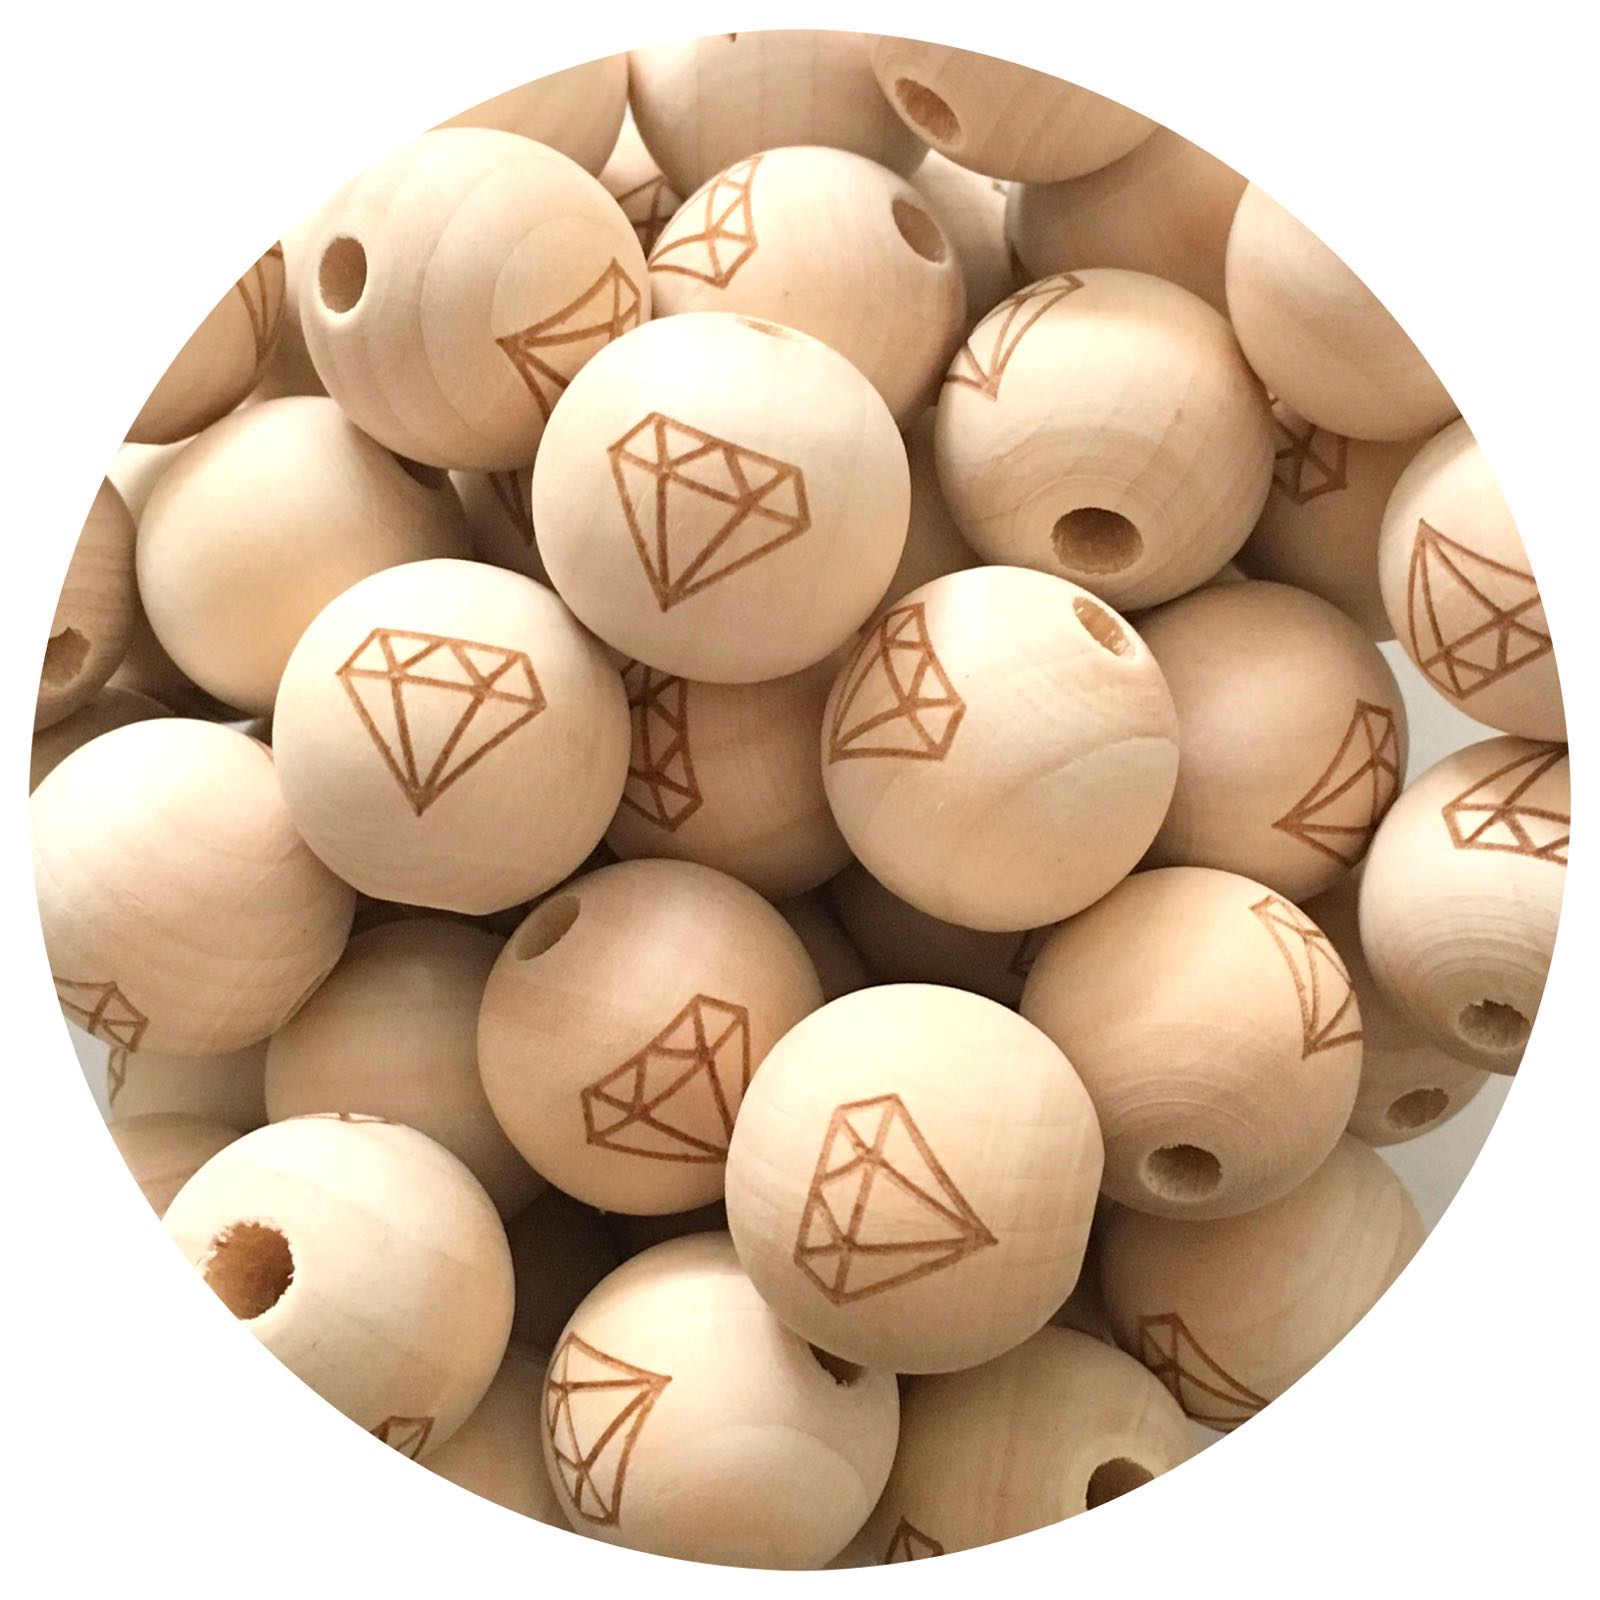 30mm Wood Beads, Bag of 10 Wood Balls for Crafts Unfinished, Wood